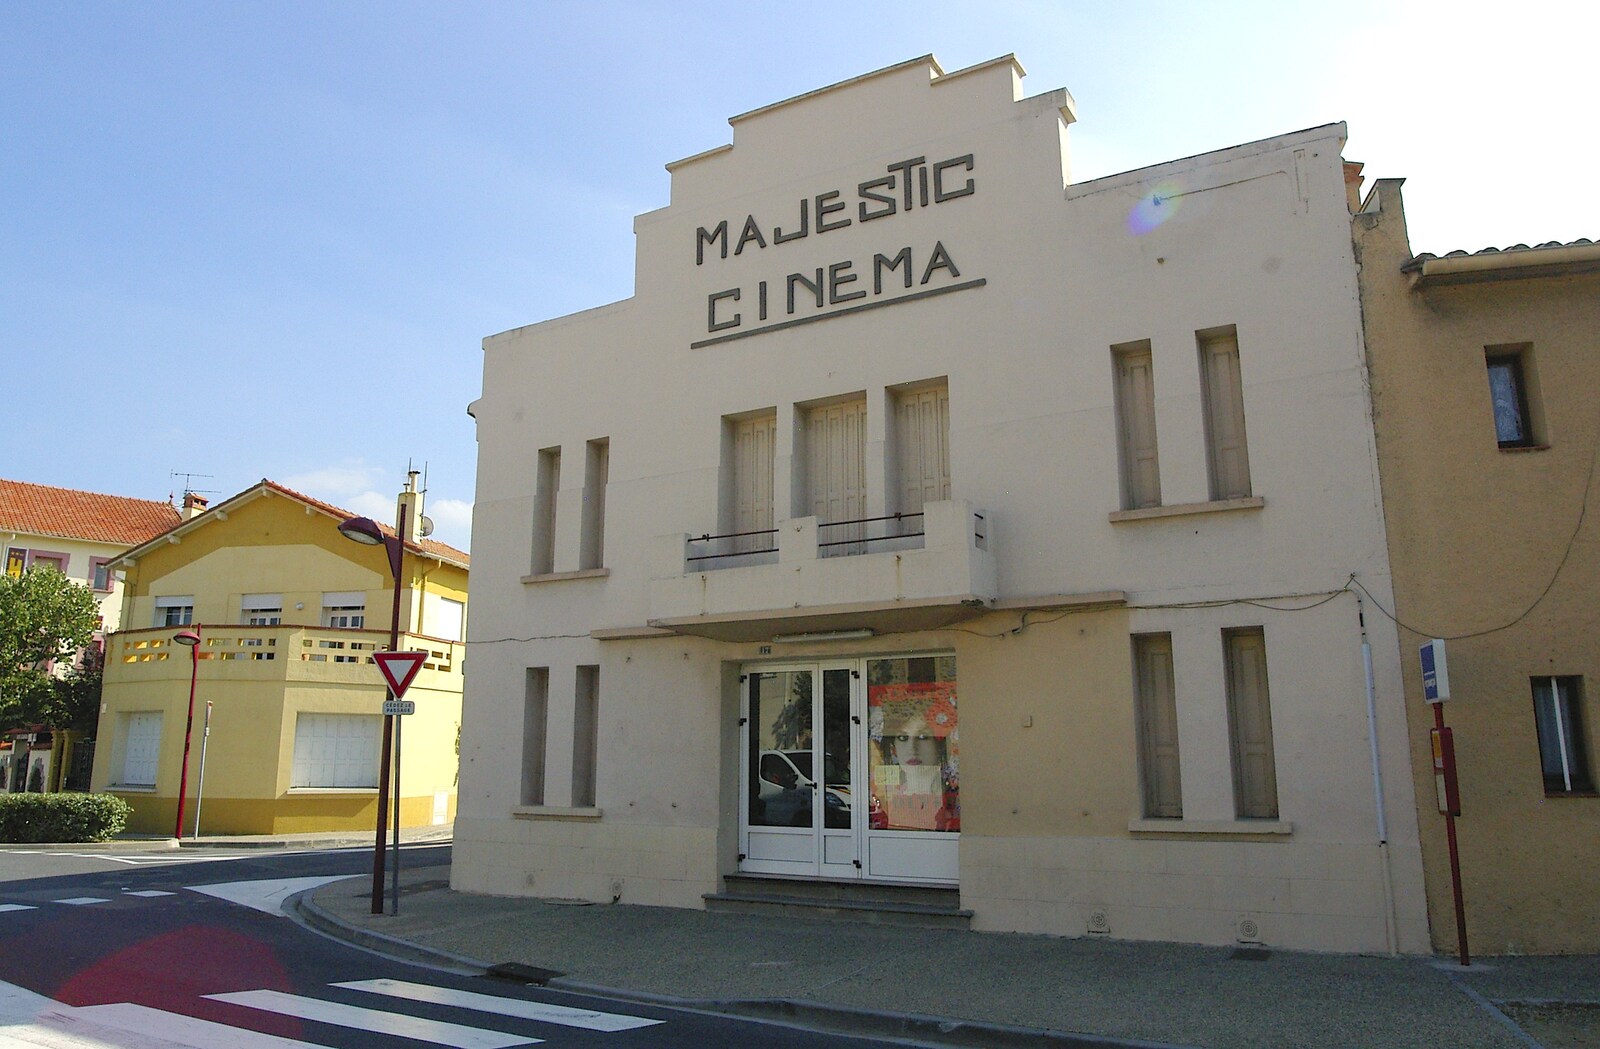 The 30s Majestic Cinema in Le Boulou from A Roussillon Farmhouse, Fourques, Perpignan, France - 17th September 2006